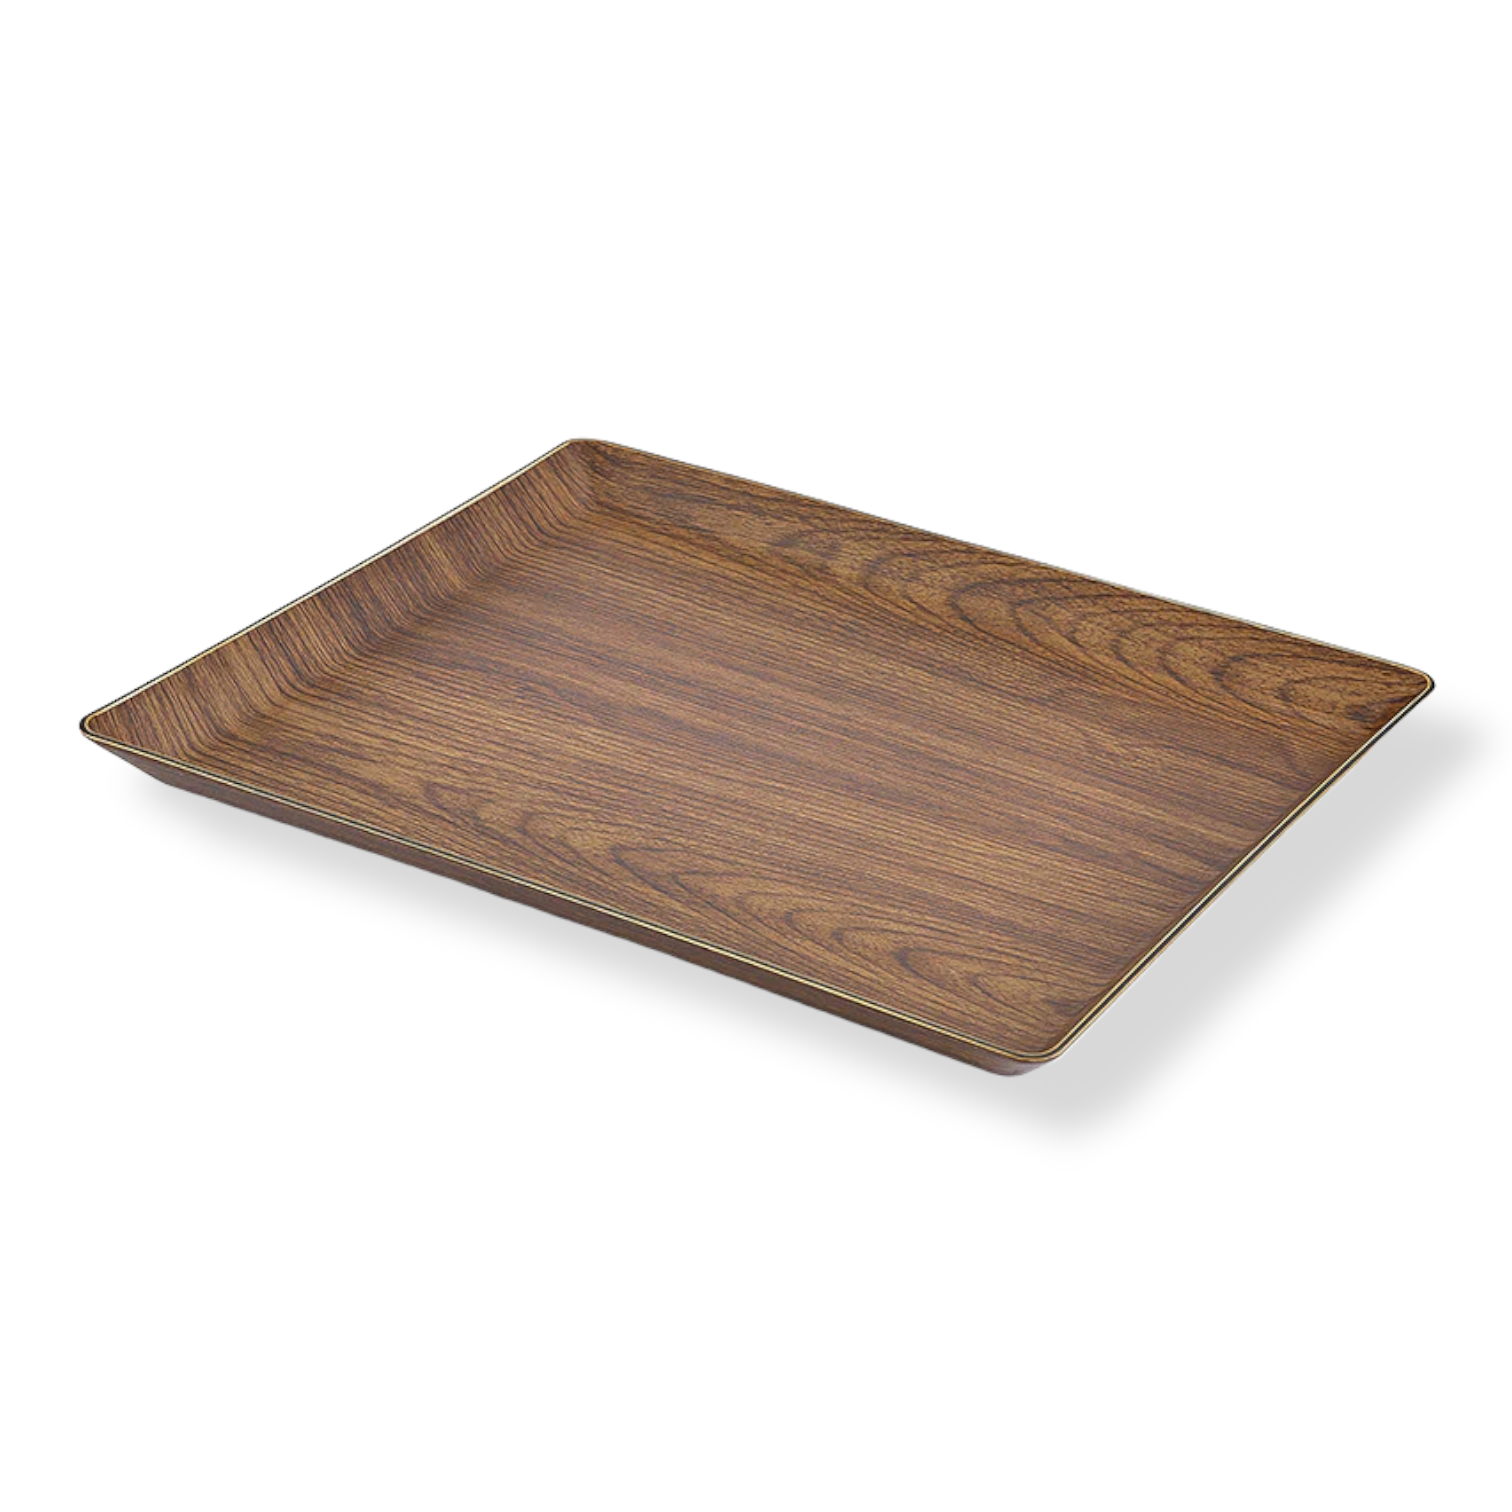 Small Plastic Tray with Wooden Finish